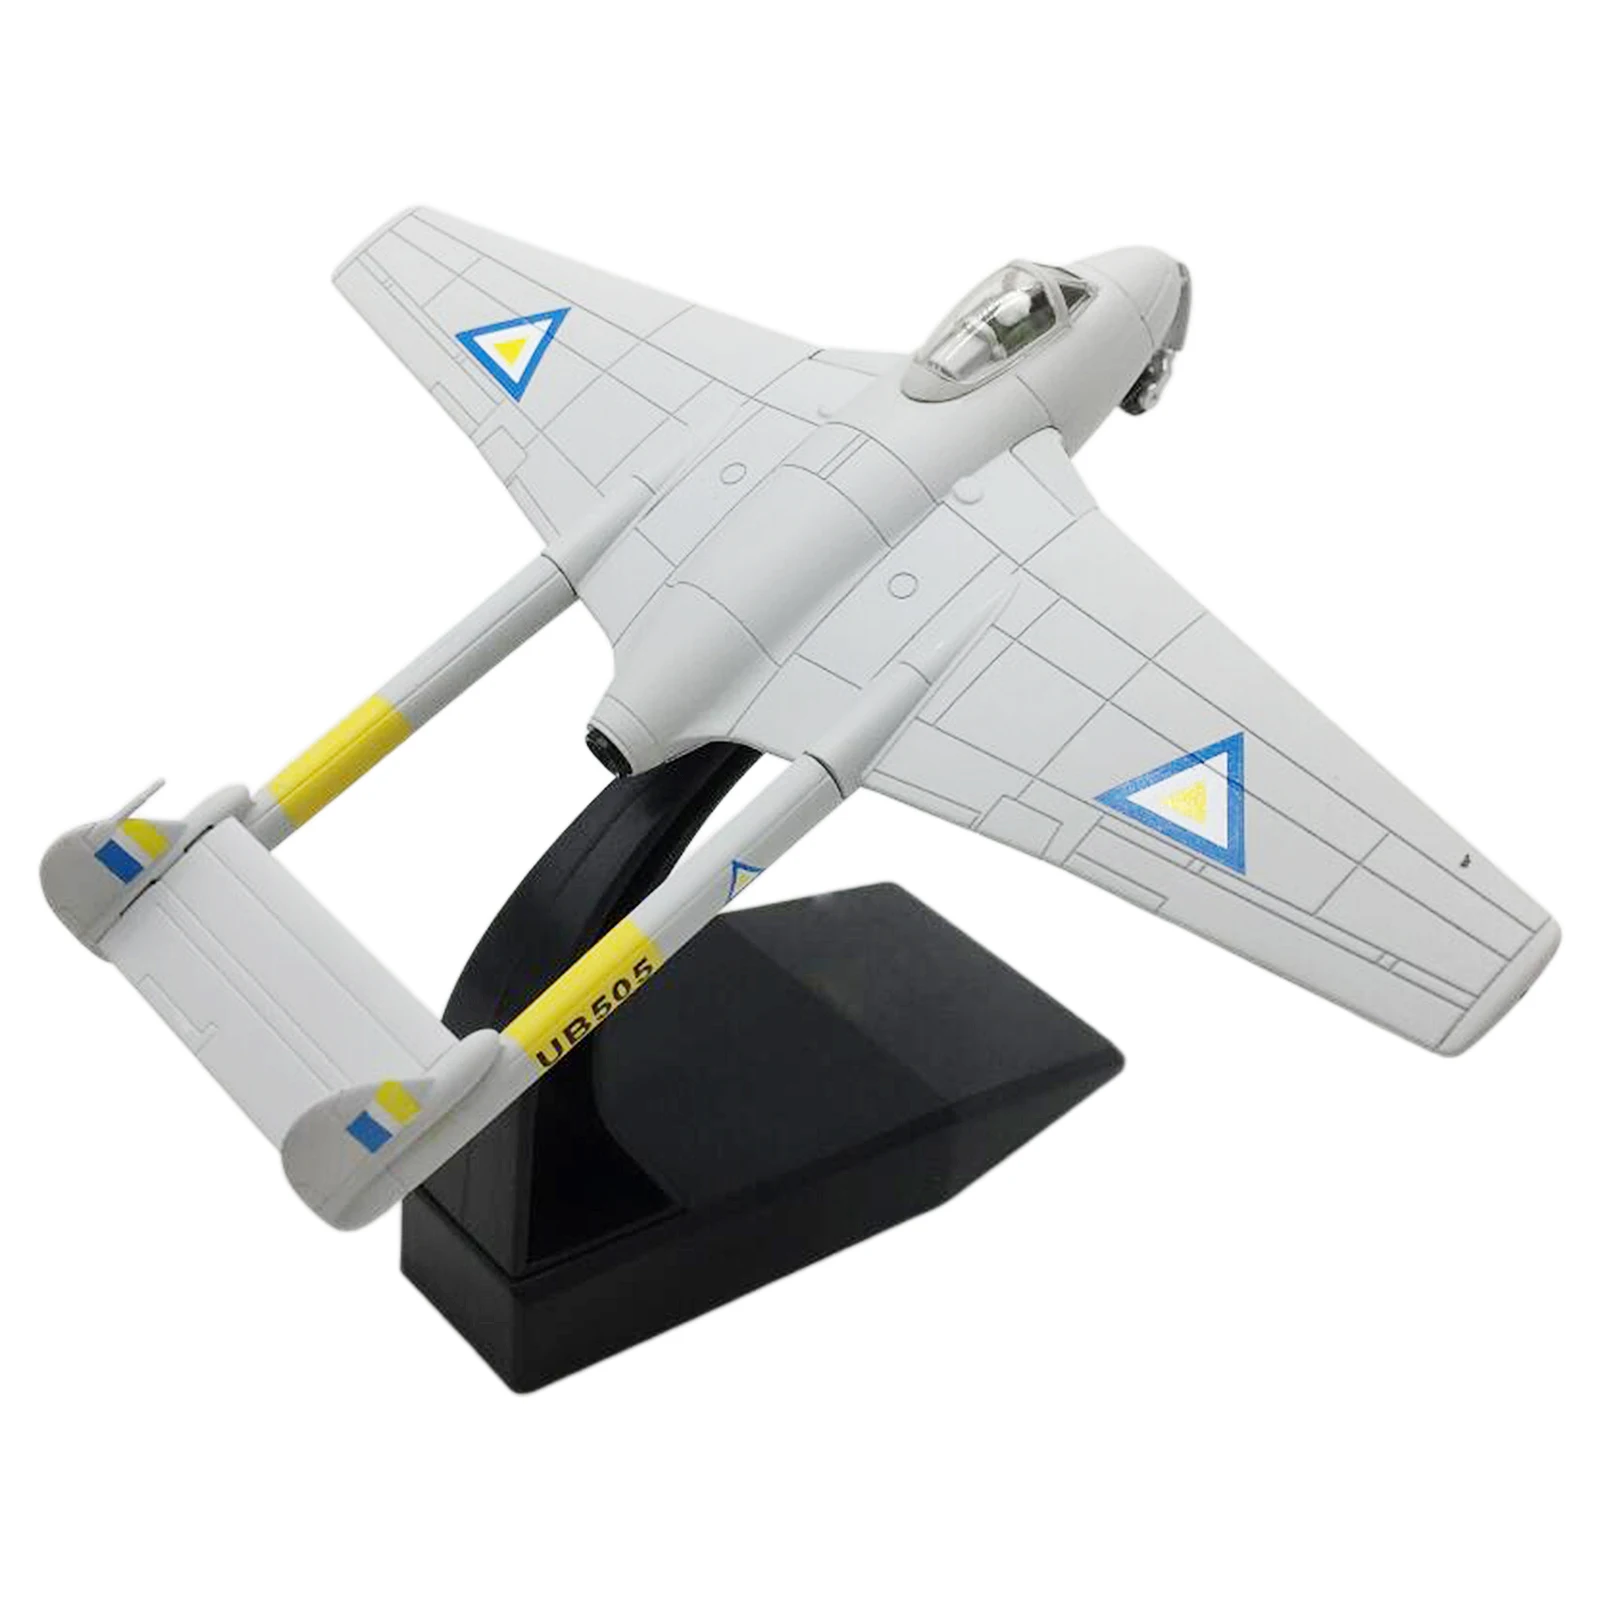 Metal 1:72 DH.115 T-55 Display Plane Air Fighter Model w/ Stand Office Bar Decor for Collection